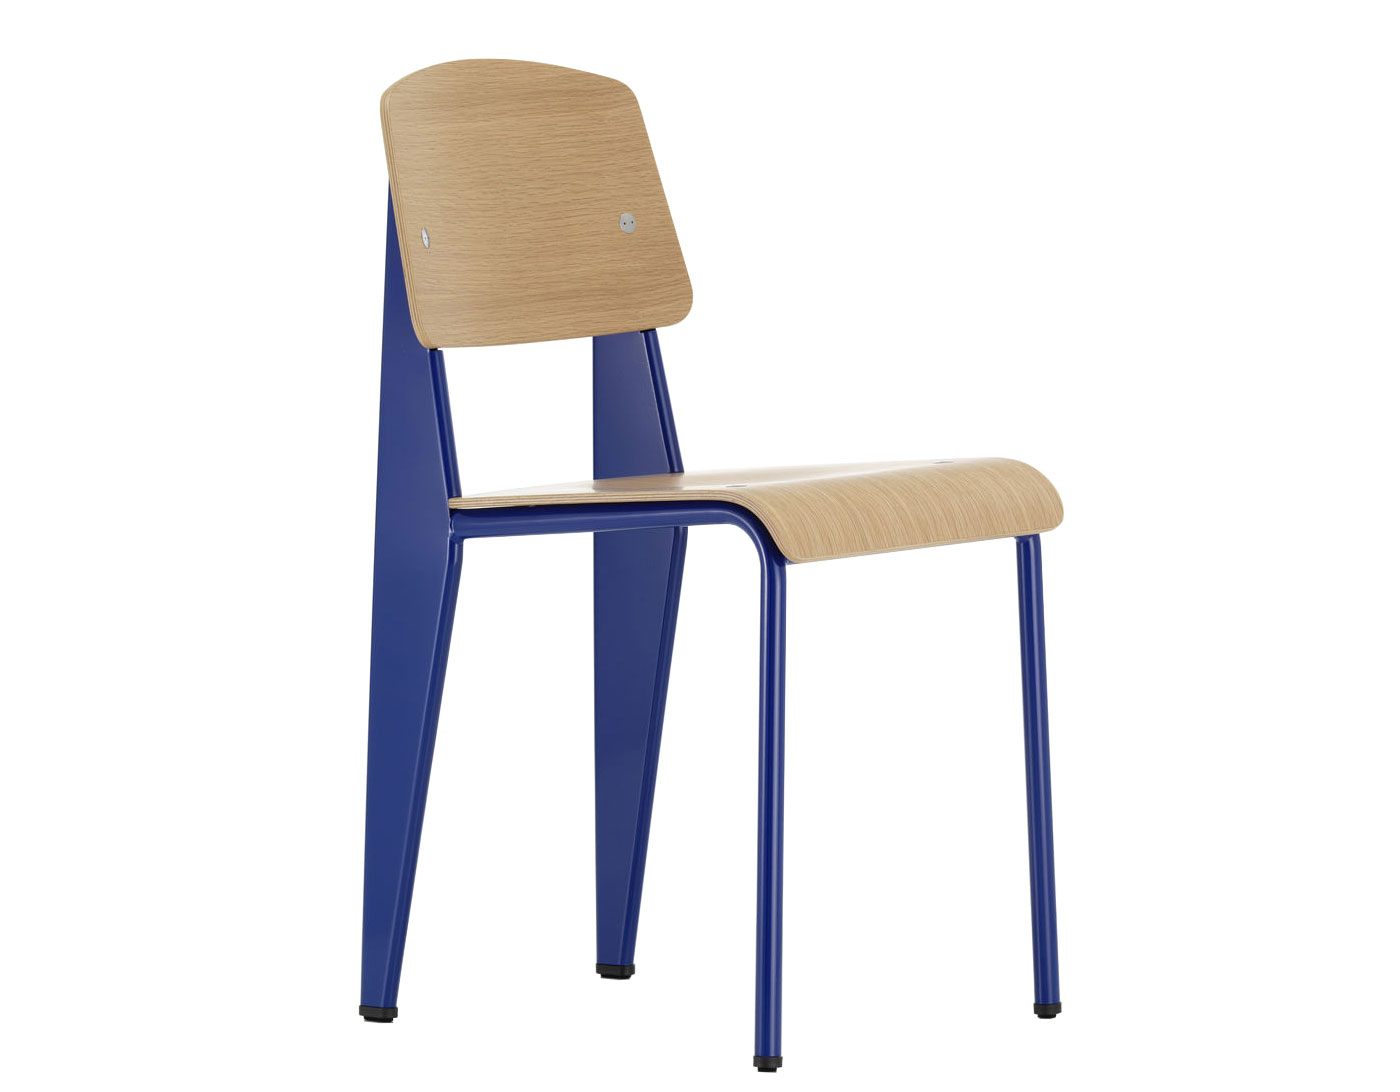 Jean Prouve Standard Chair produced Vitra | hive